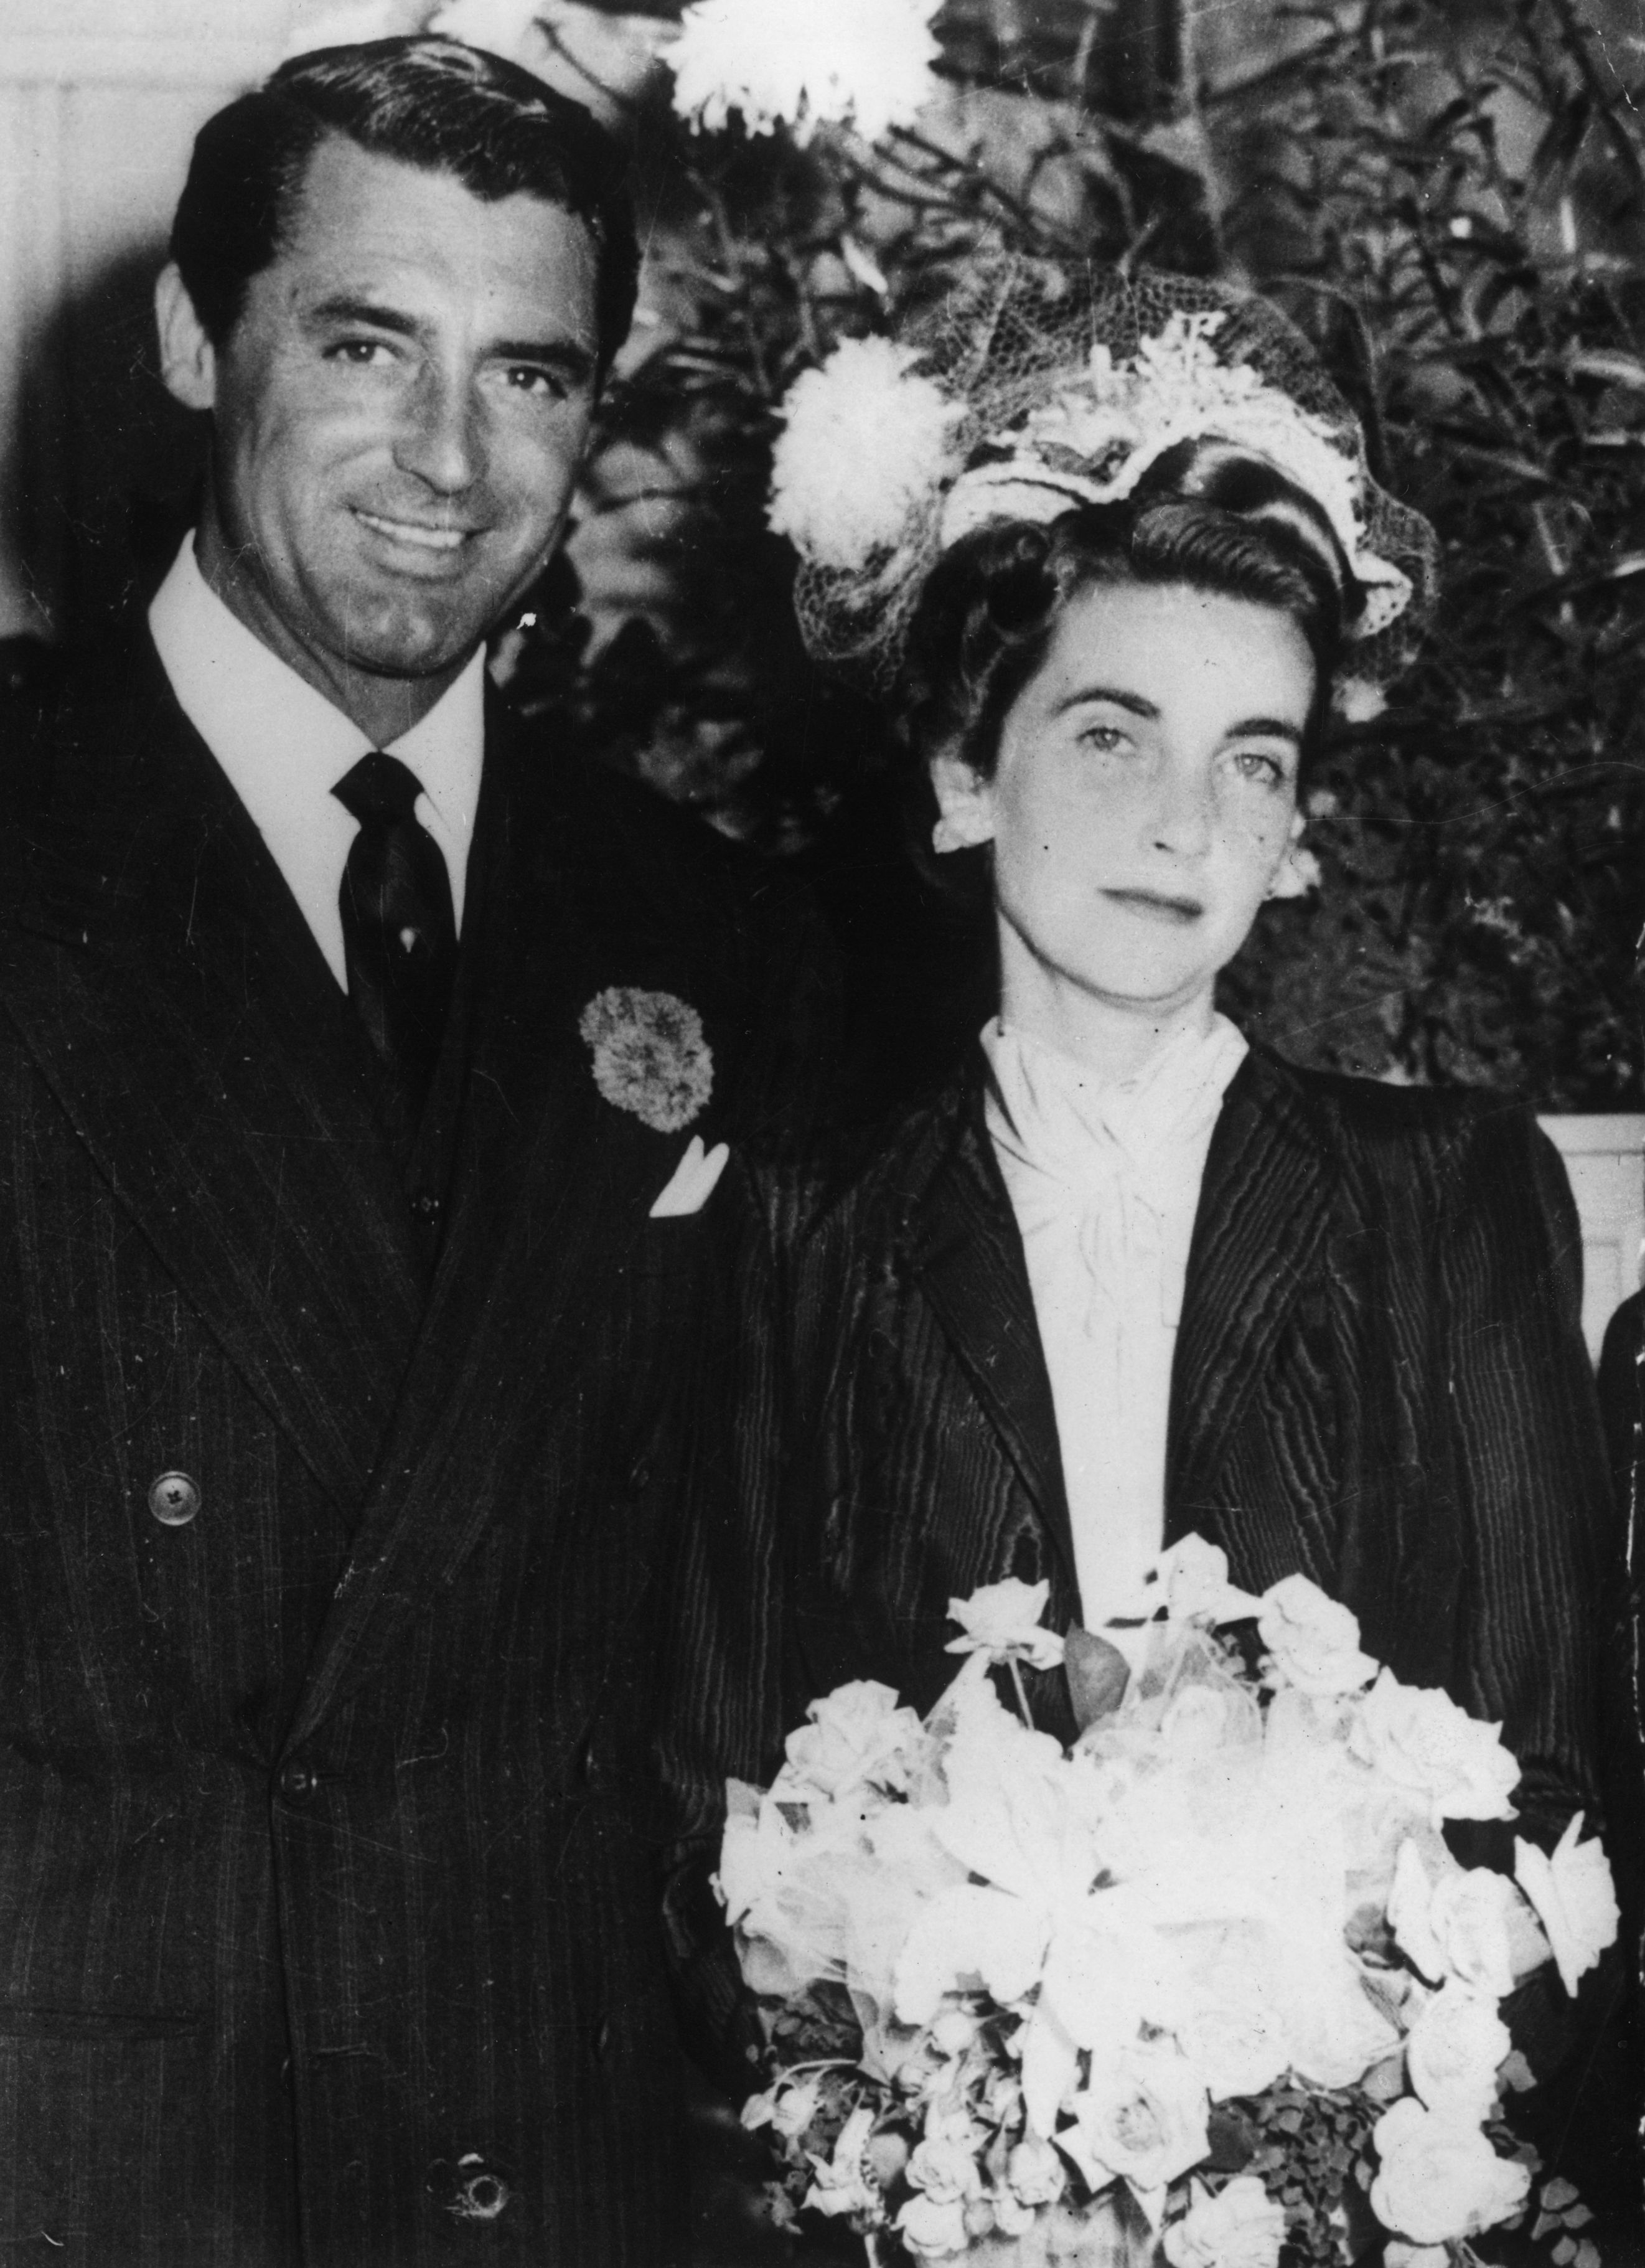  Film star Cary Grant (1904 - 1986) with his bride the Woolworth heiress, Barbara Hutton (1912 - 1979) | Source: Getty Images